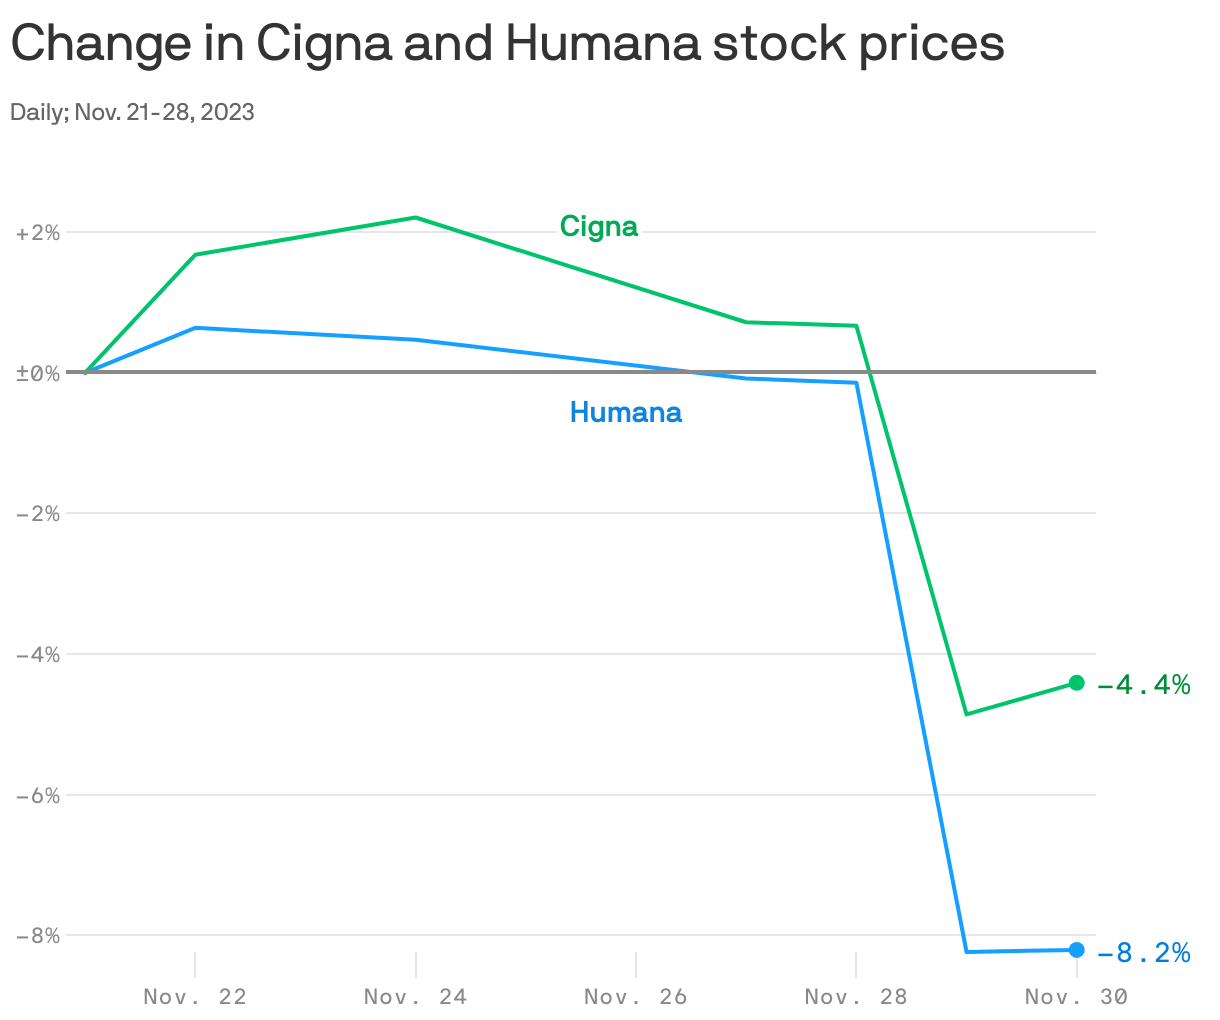 Change in Cigna and Humana stock prices